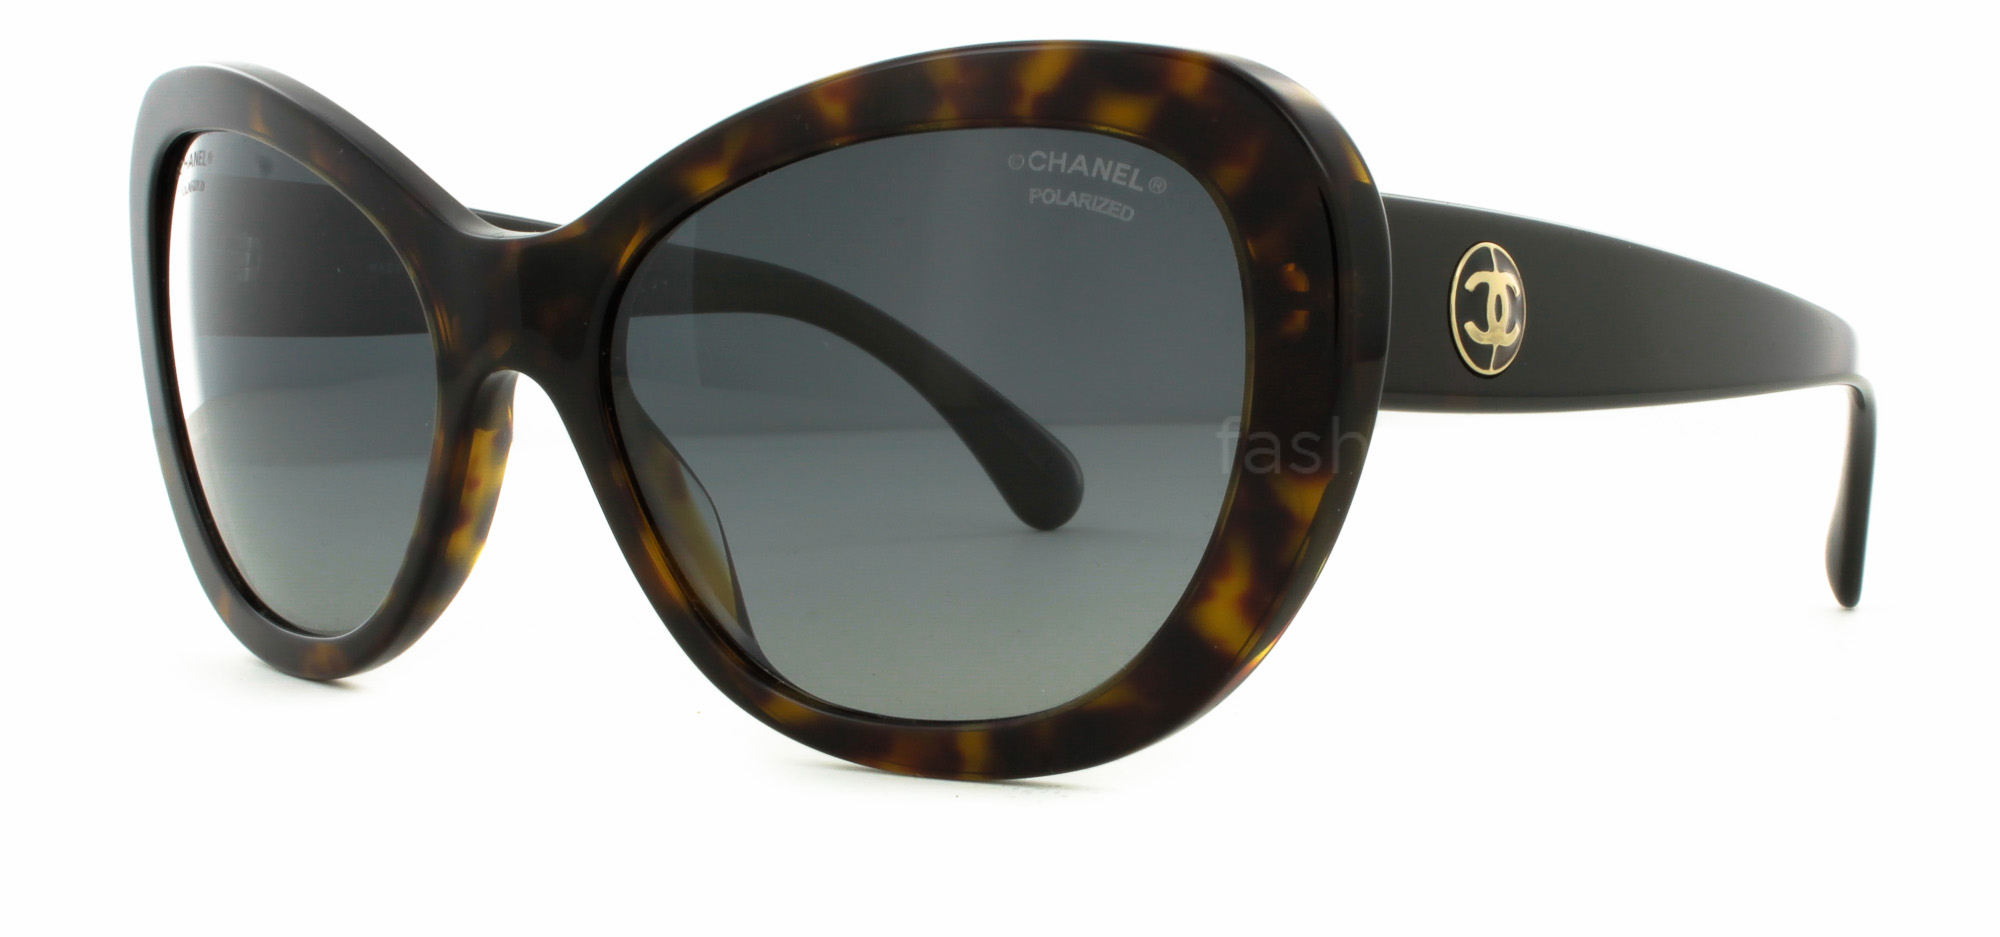 CHANEL 5321 714S8